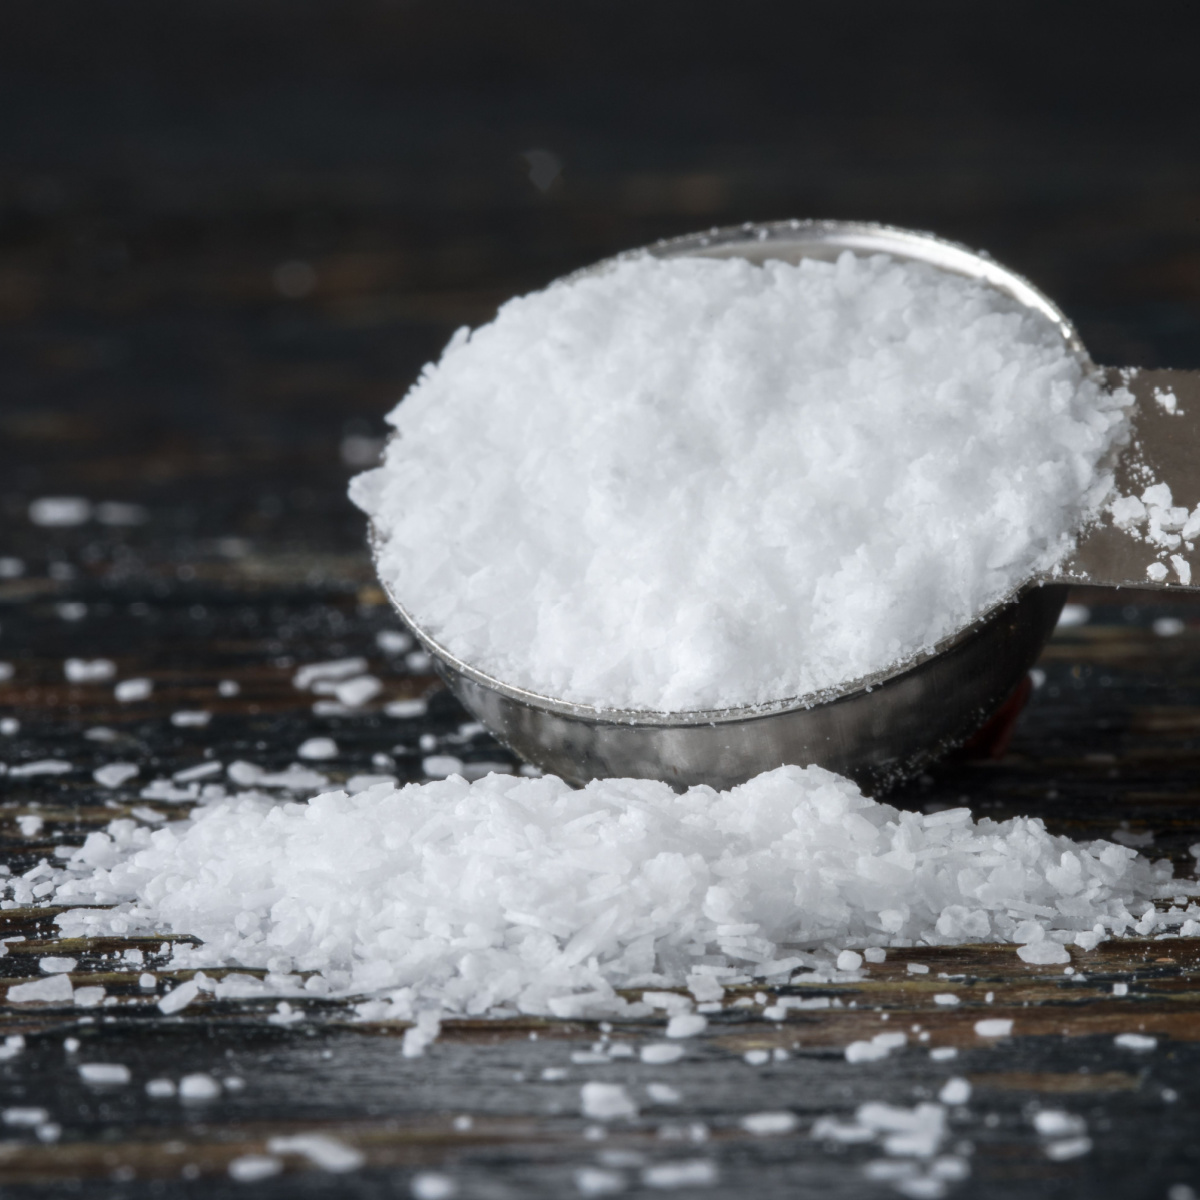 Salt Spilled on a Teaspoon an a Wooden Table - Kosher Salt vs Sea Salt: What's the Difference?